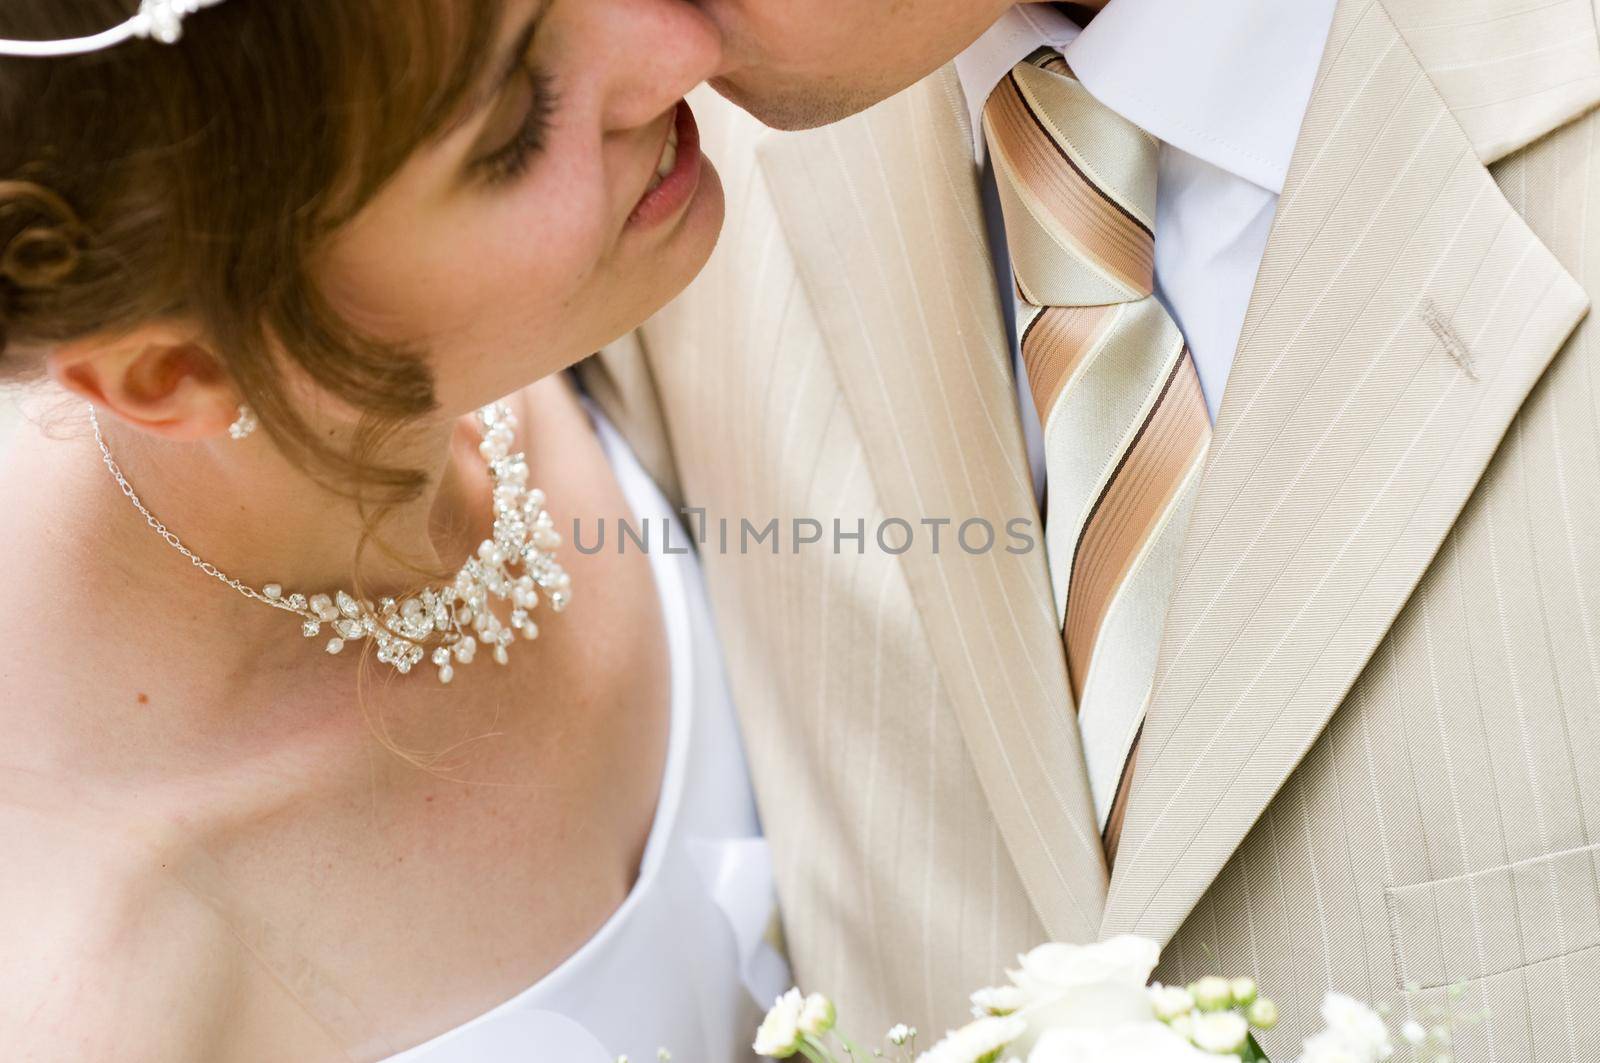 Newlyweds kissing after a wedding ceremony.